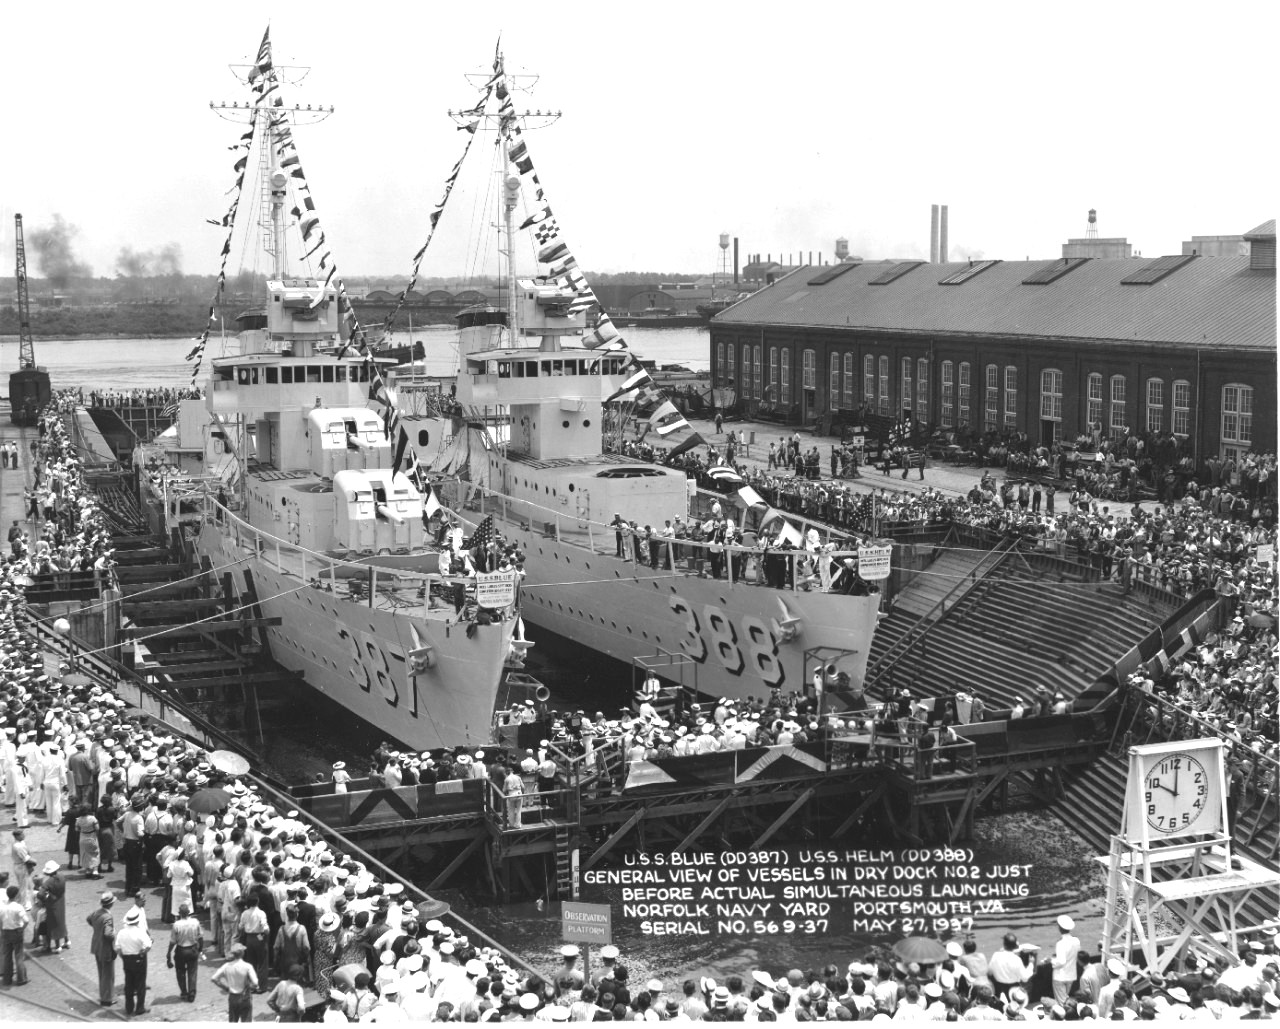 Bagley-class destroyers Blue and Helm on 27 May 1937, the date of their launching, in Drydock #2 at Norfolk Navy Yard, Portsmouth, Virginia, United States.